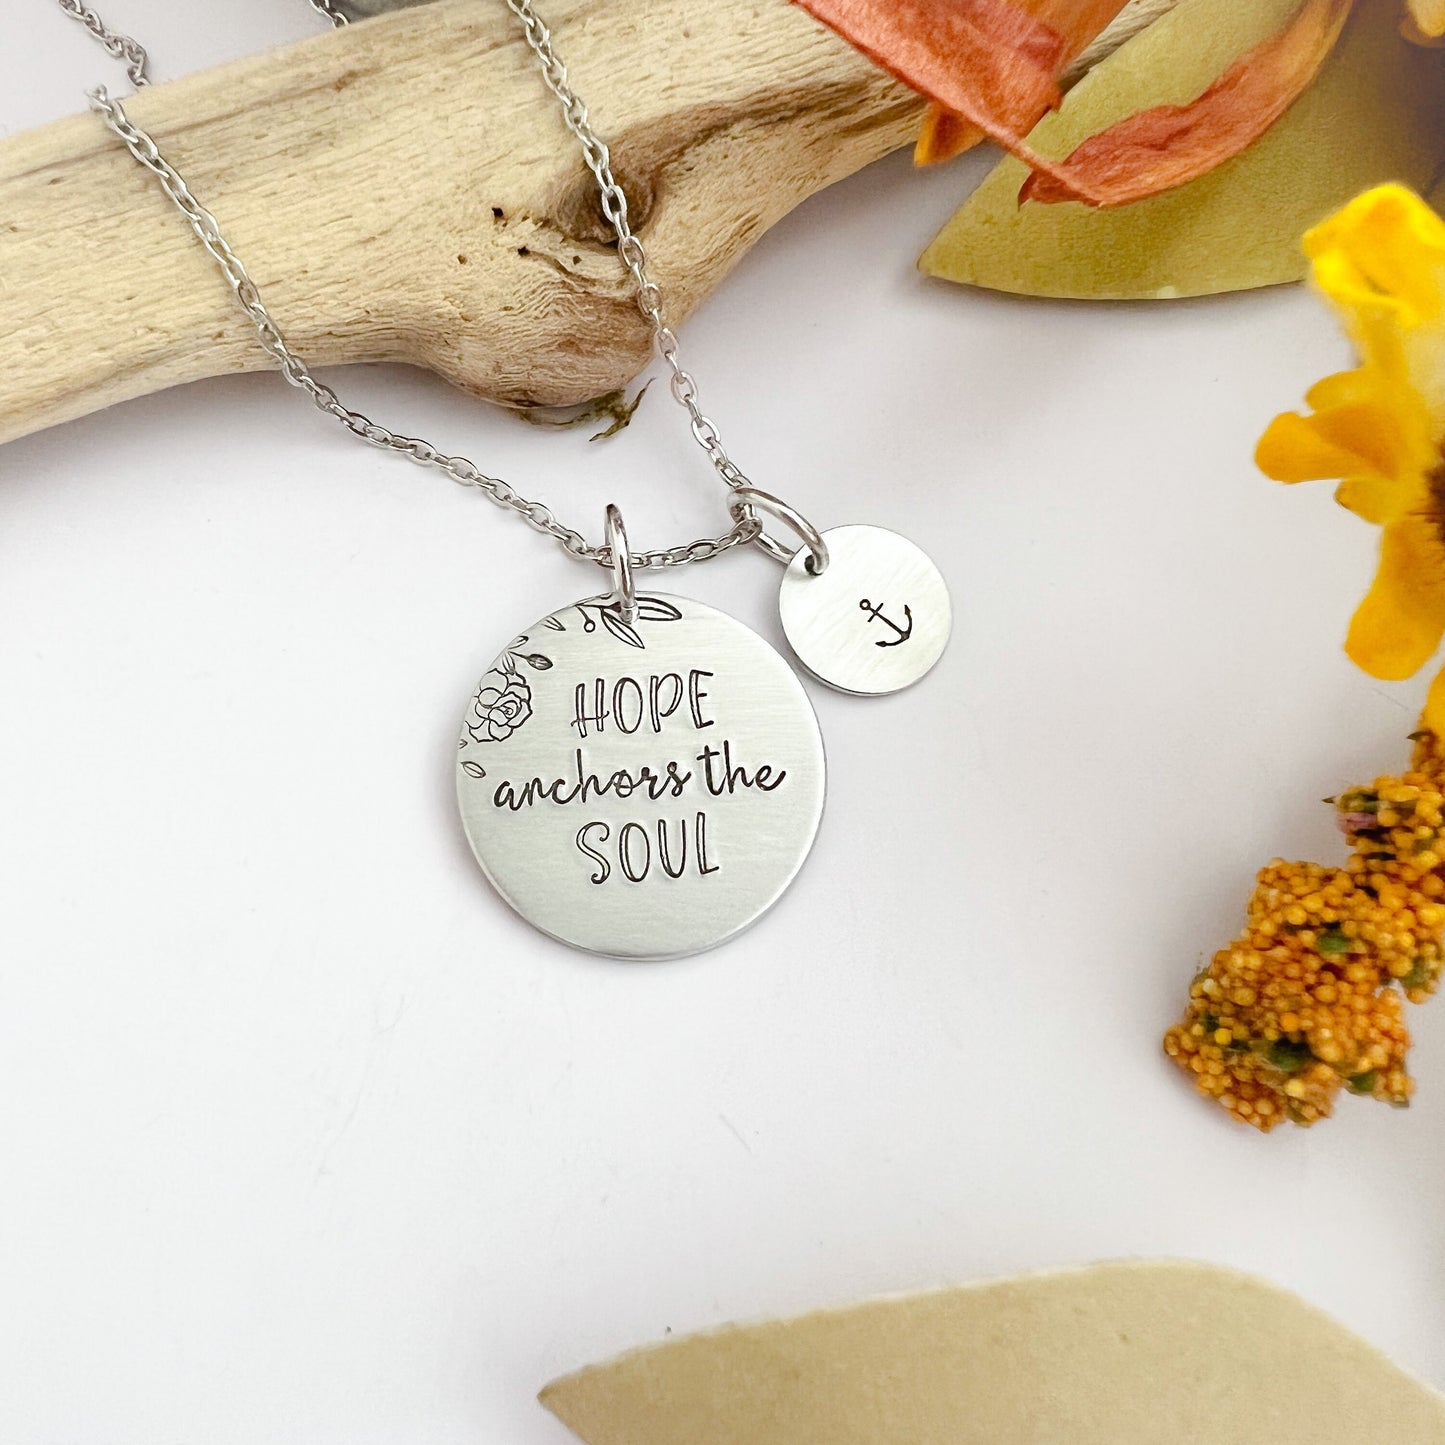 Hope anchors my soul necklace--hope jewelry--christian jewelry--religious jewelry--faith necklace--hand stamped gift--anchor jewelry